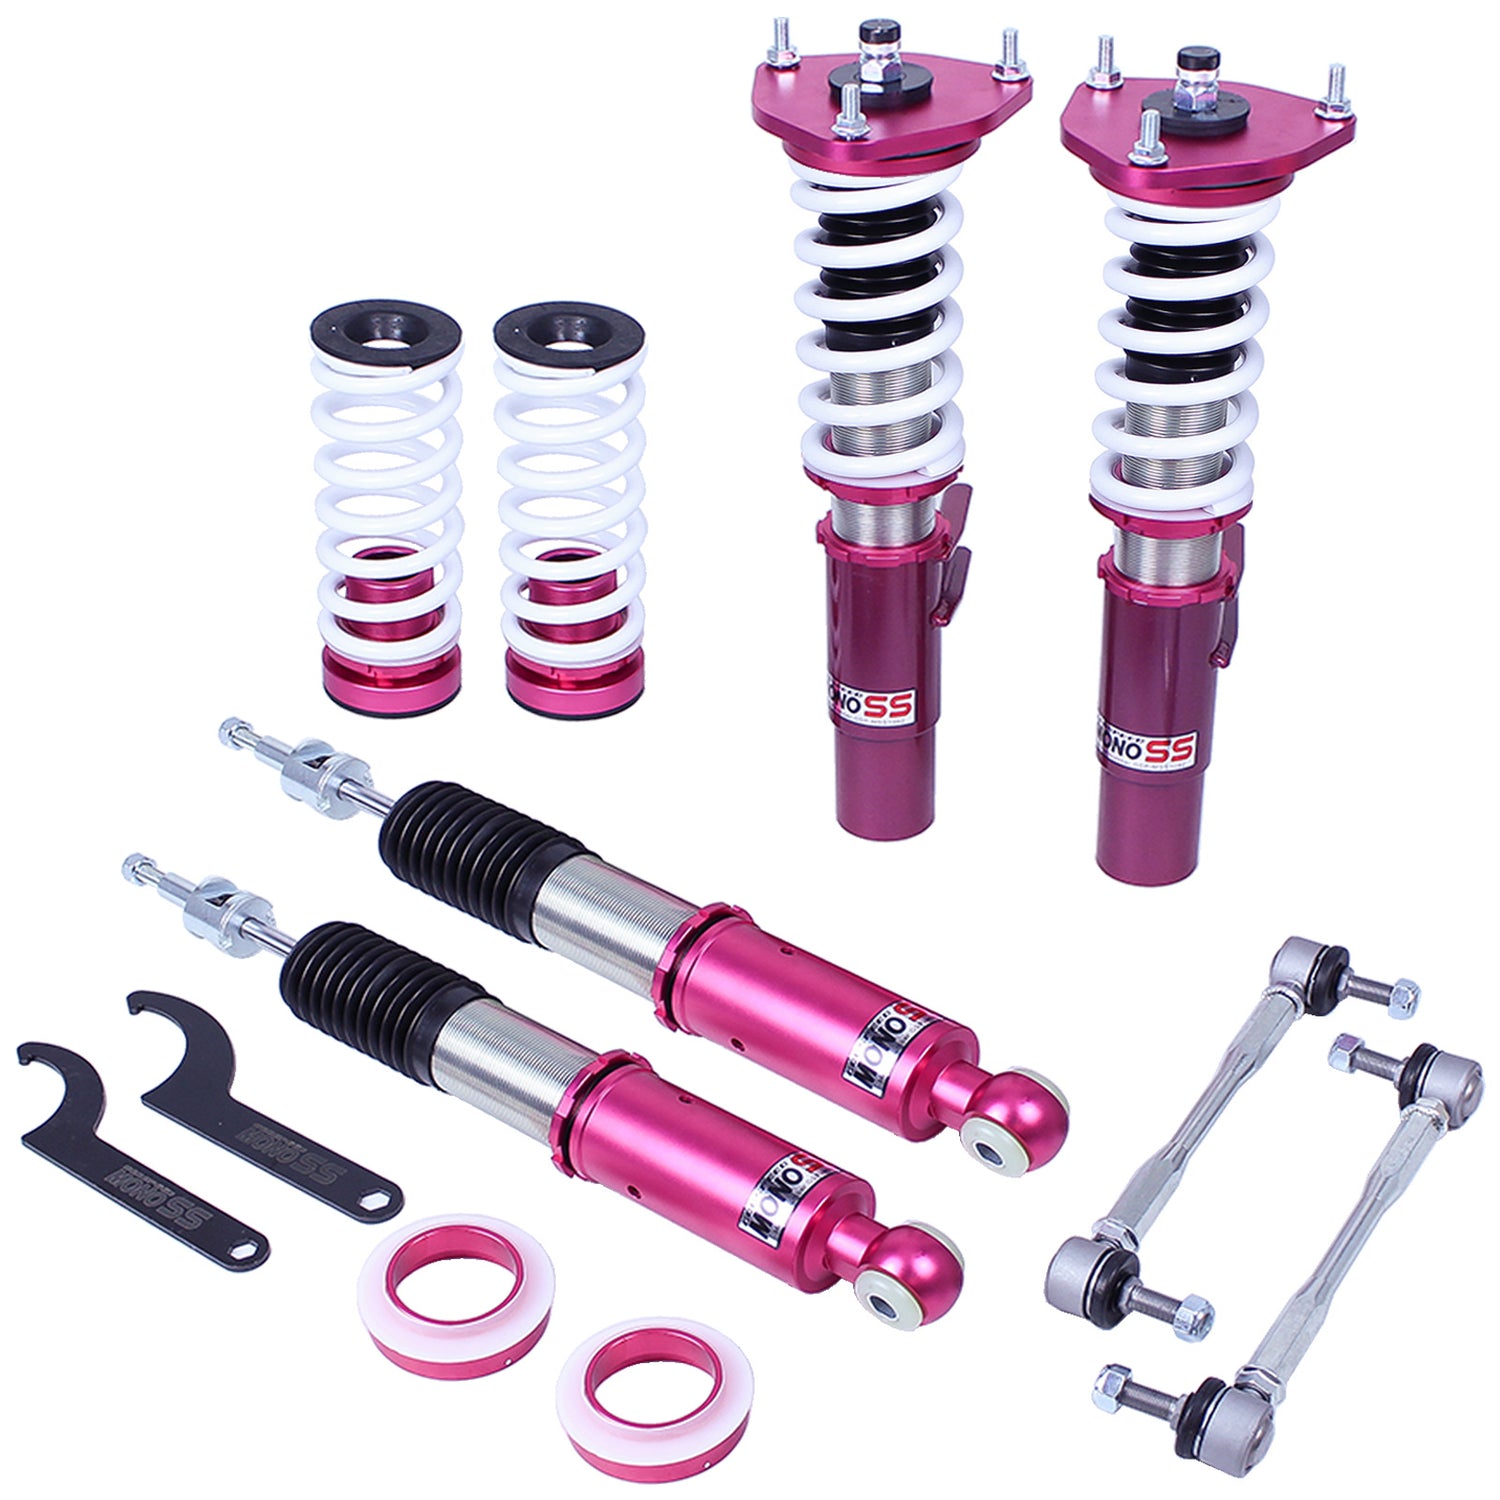 Godspeed MSS1092 MonoSS Coilover Lowering Kit, Fully Adjustable, Ride Height, Spring Tension And 16 Click Damping, Volkswagen Golf R(MK6) 2011-14